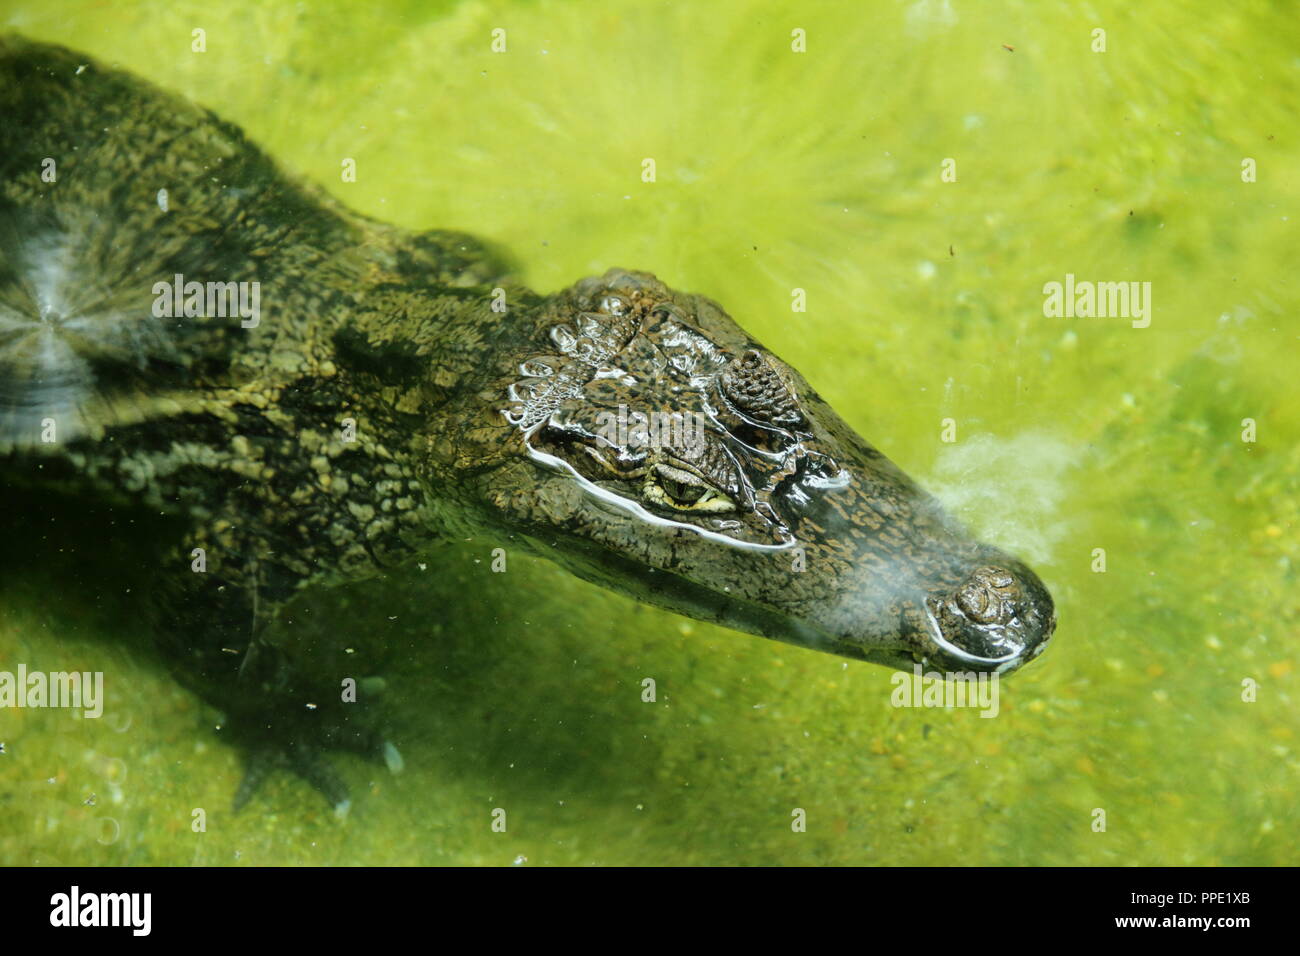 Closeup picture of a Caiman crocodile (Caimaninae, spectacled caiman) floating in still water Stock Photo